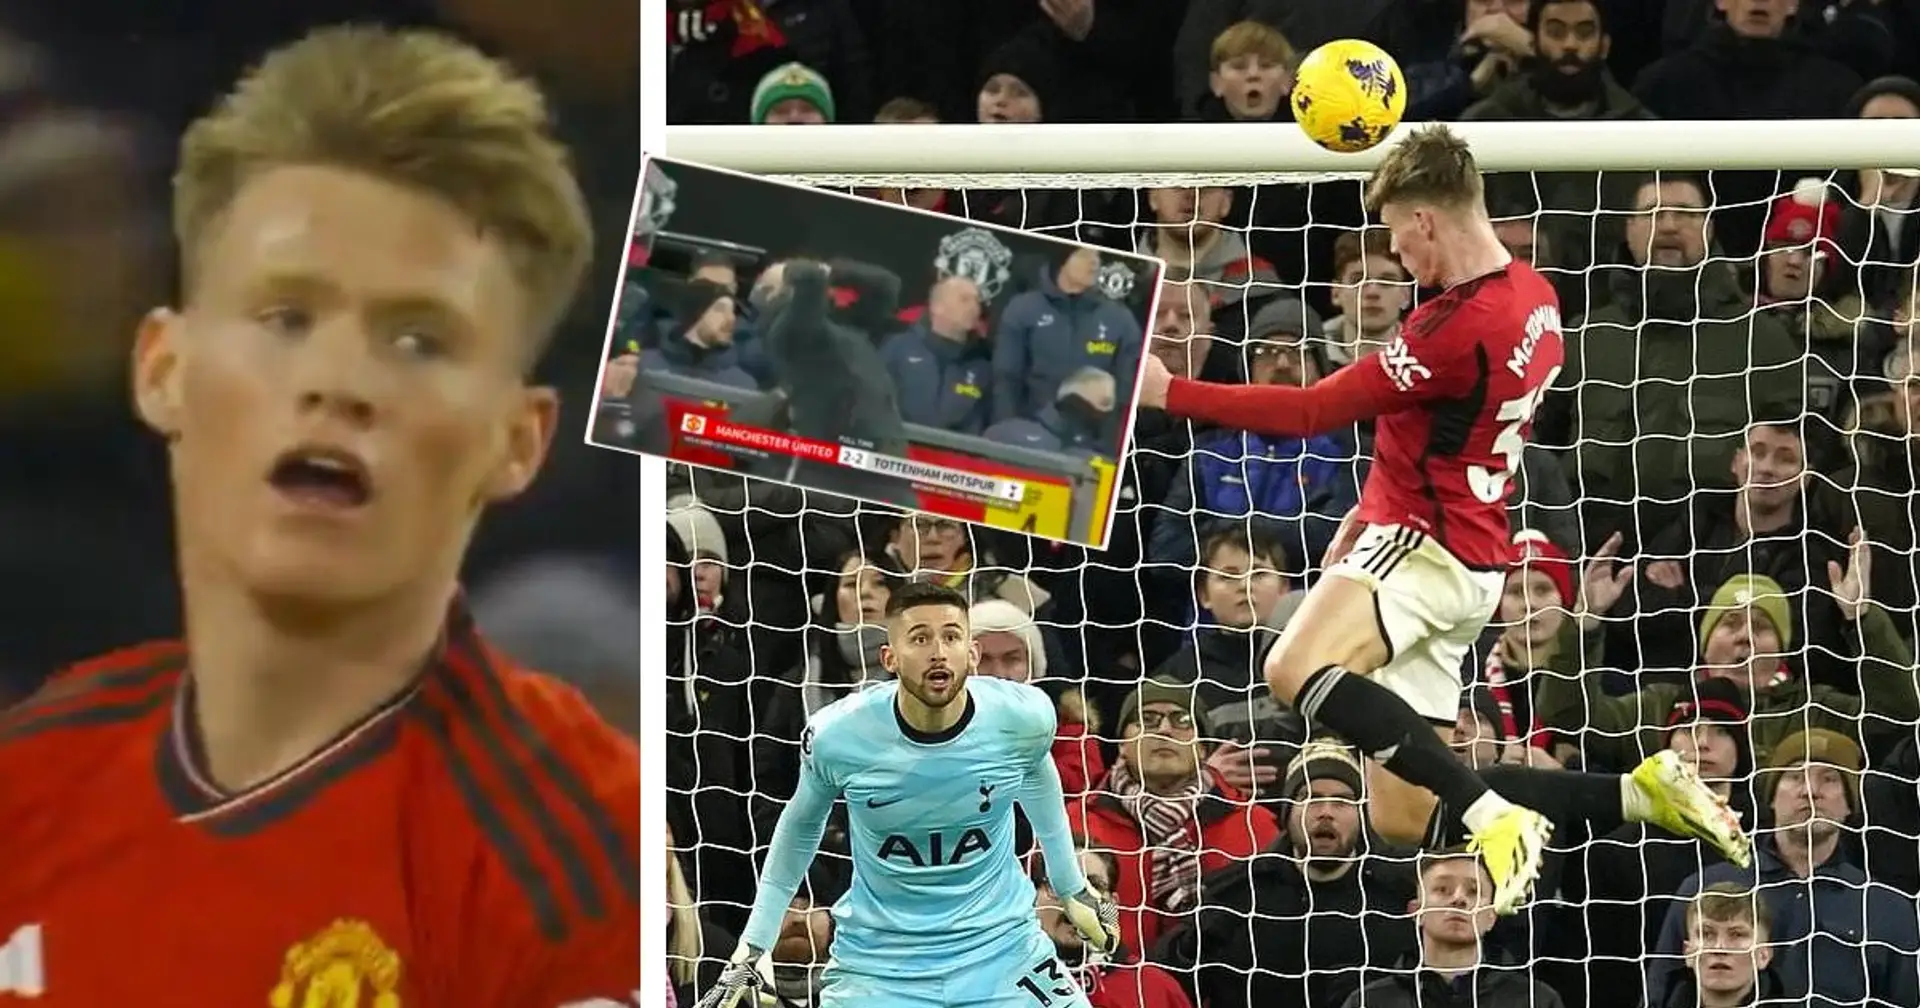 Ten Hag's instant reaction to McTominay's late miss against Tottenham - spotted 